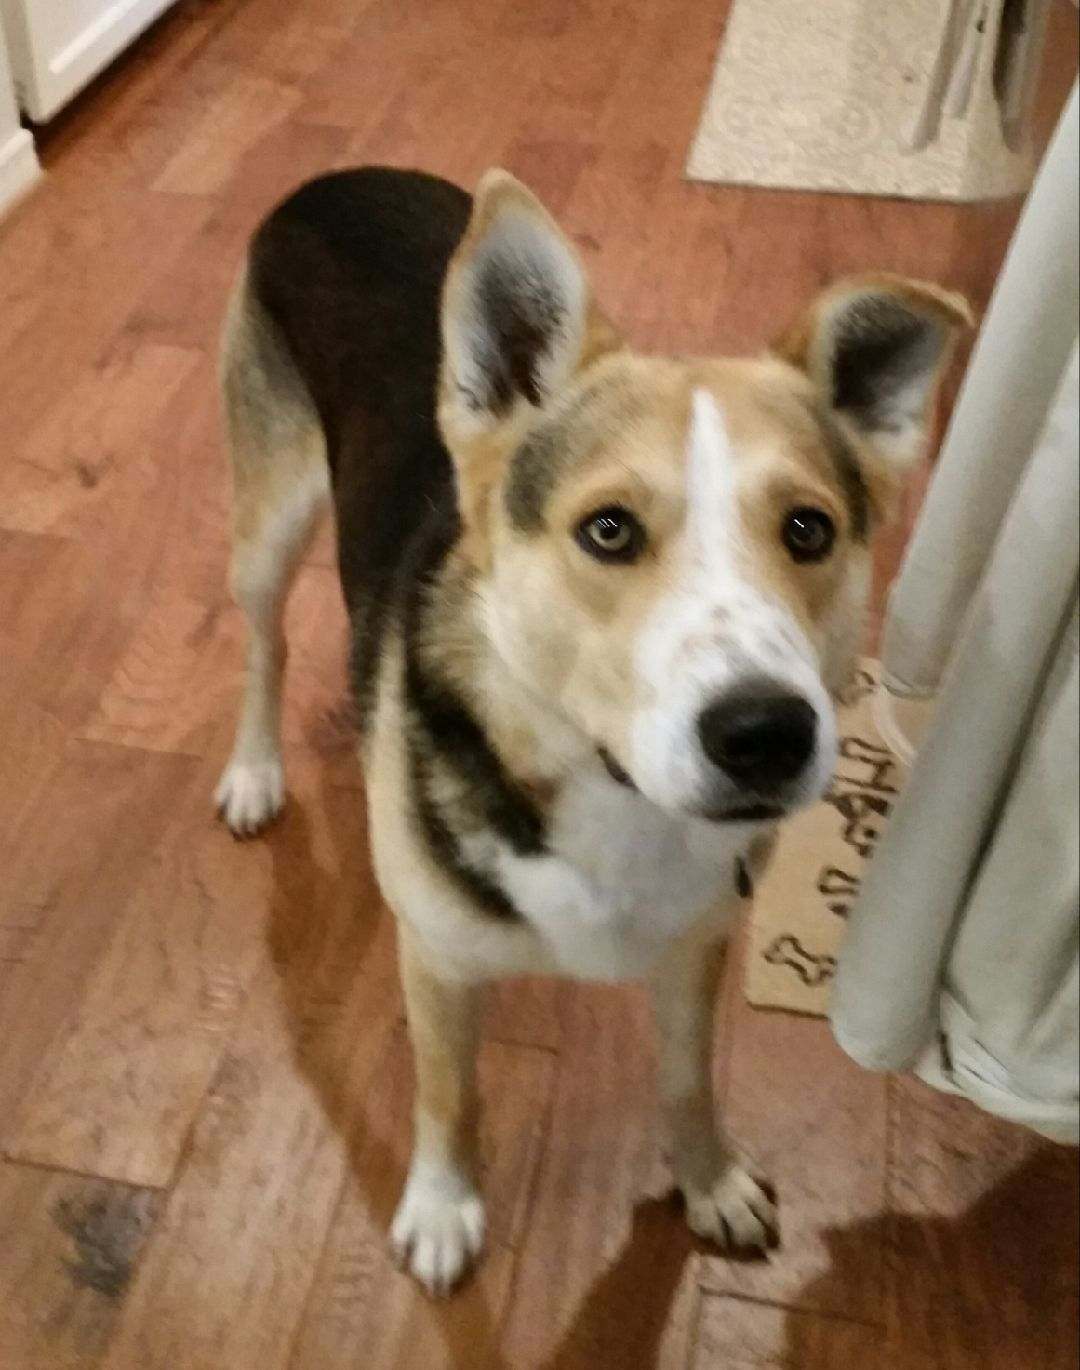 Image of Tippy, Lost Dog